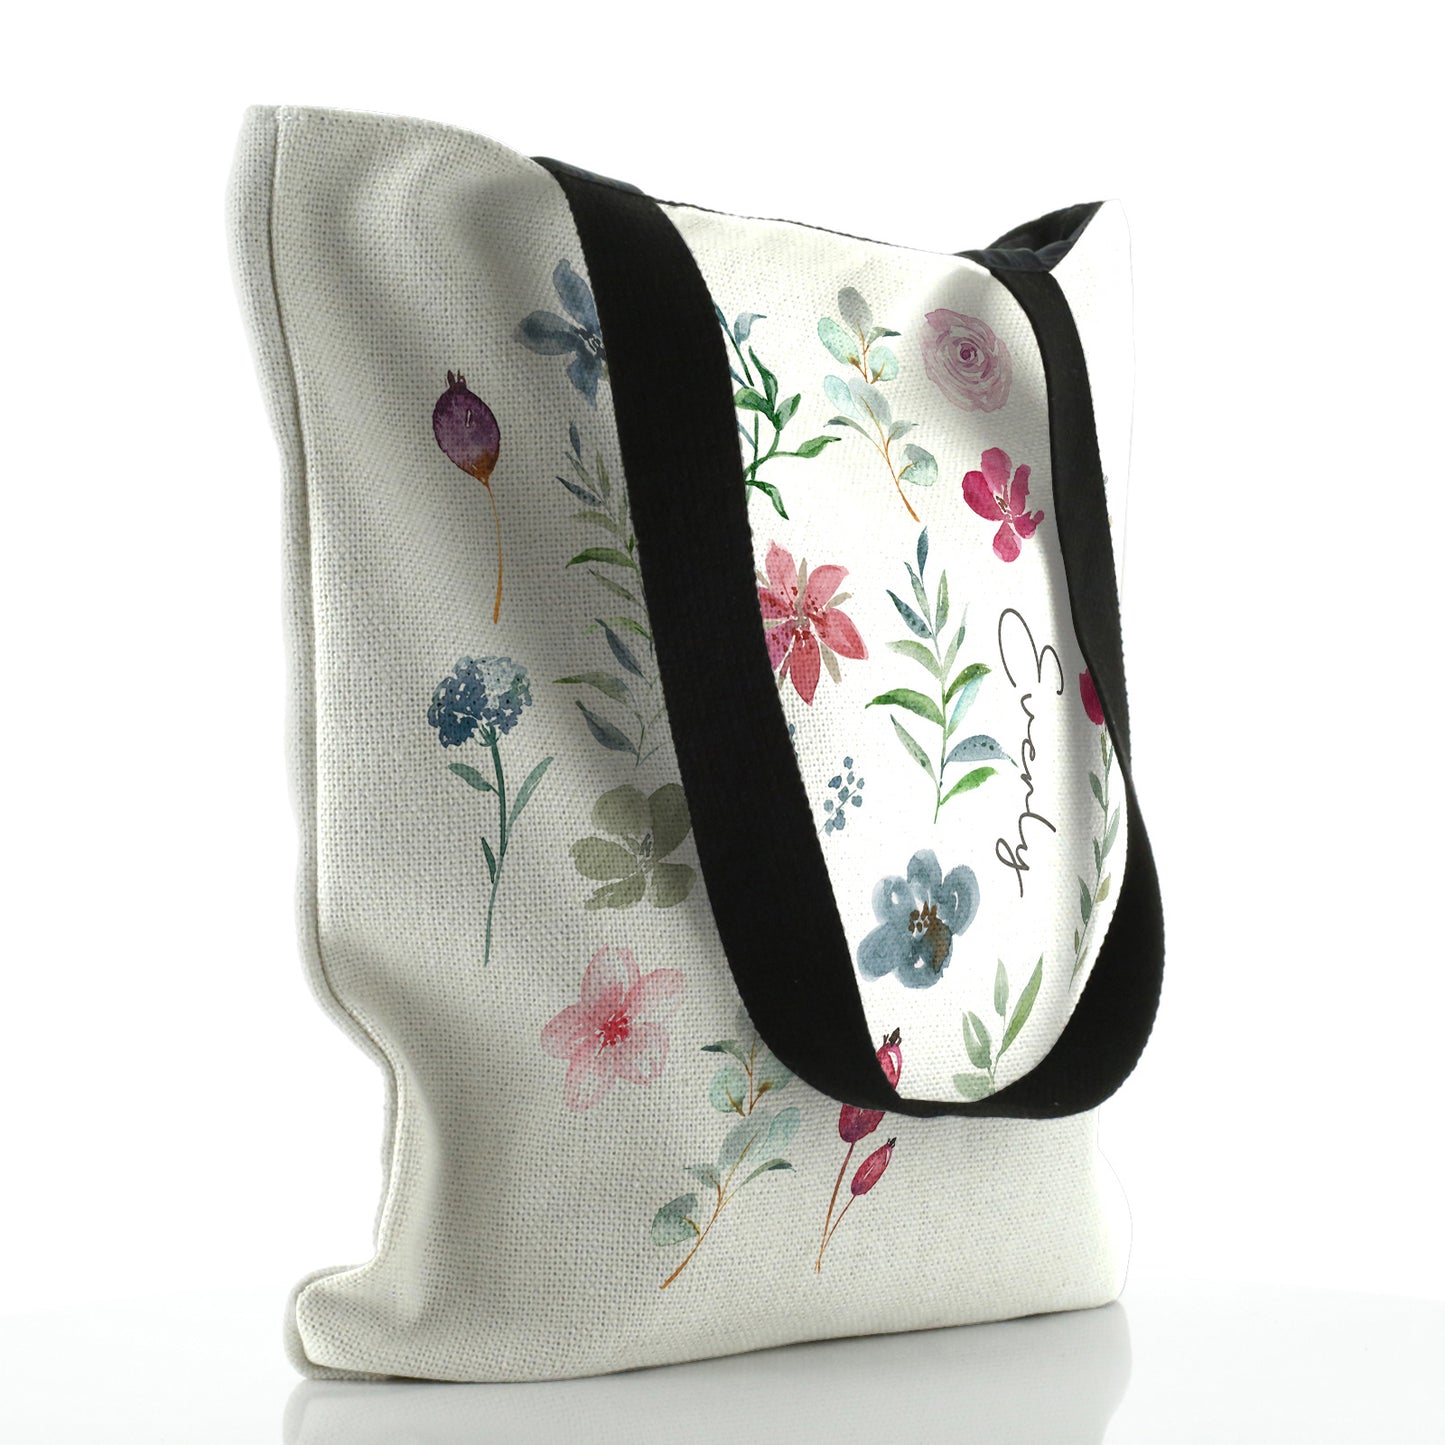 Personalised White Tote Bag with Stylish Text and Purple Flowers Floral Print